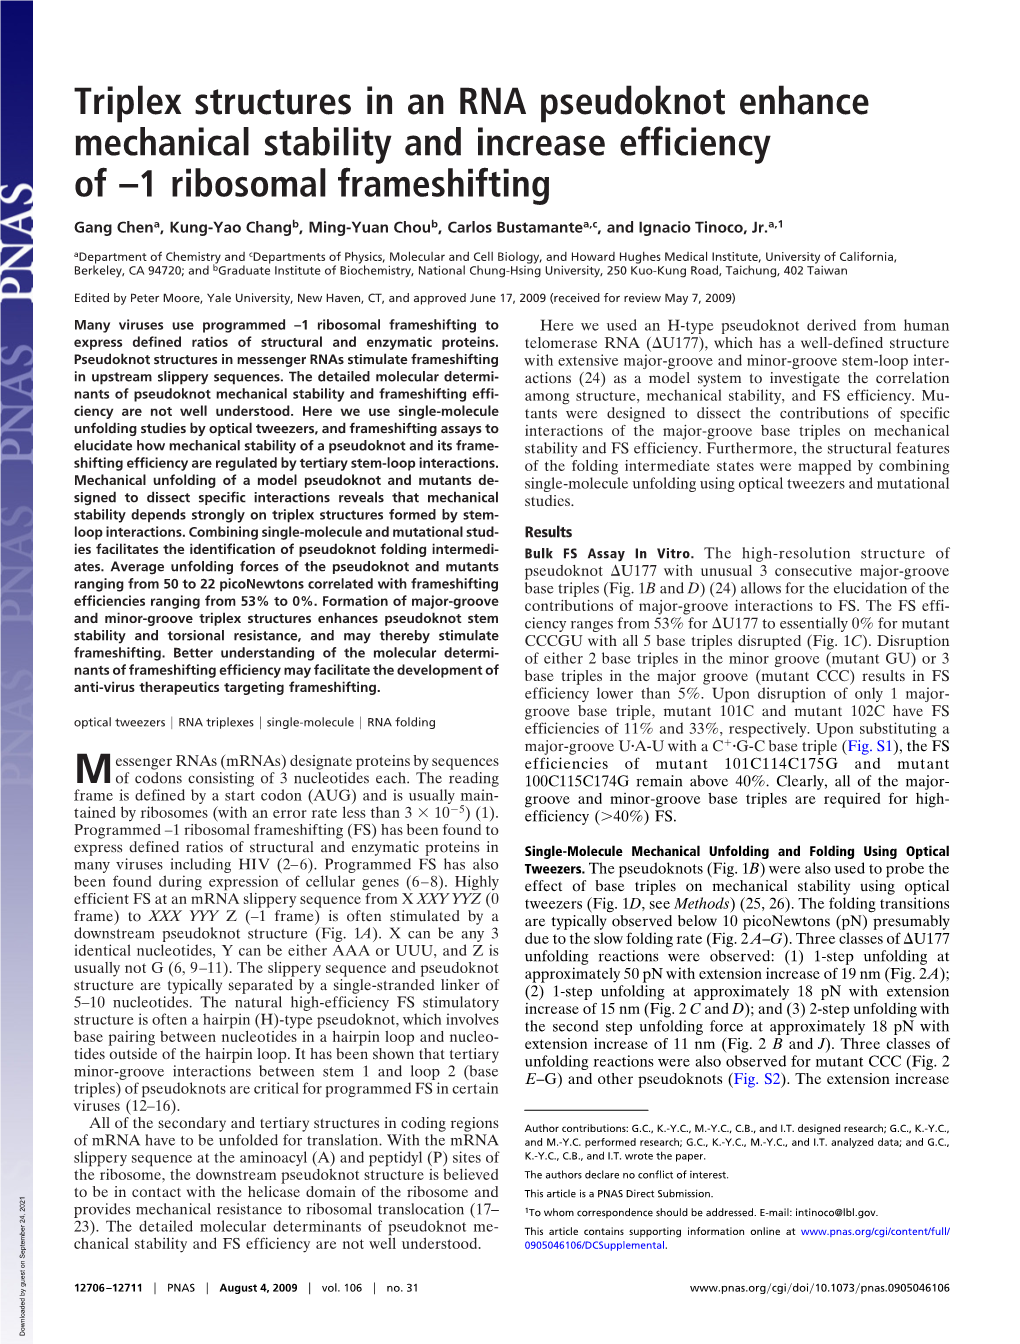 Triplex Structures in an RNA Pseudoknot Enhance Mechanical Stability and Increase Efficiency of –1 Ribosomal Frameshifting